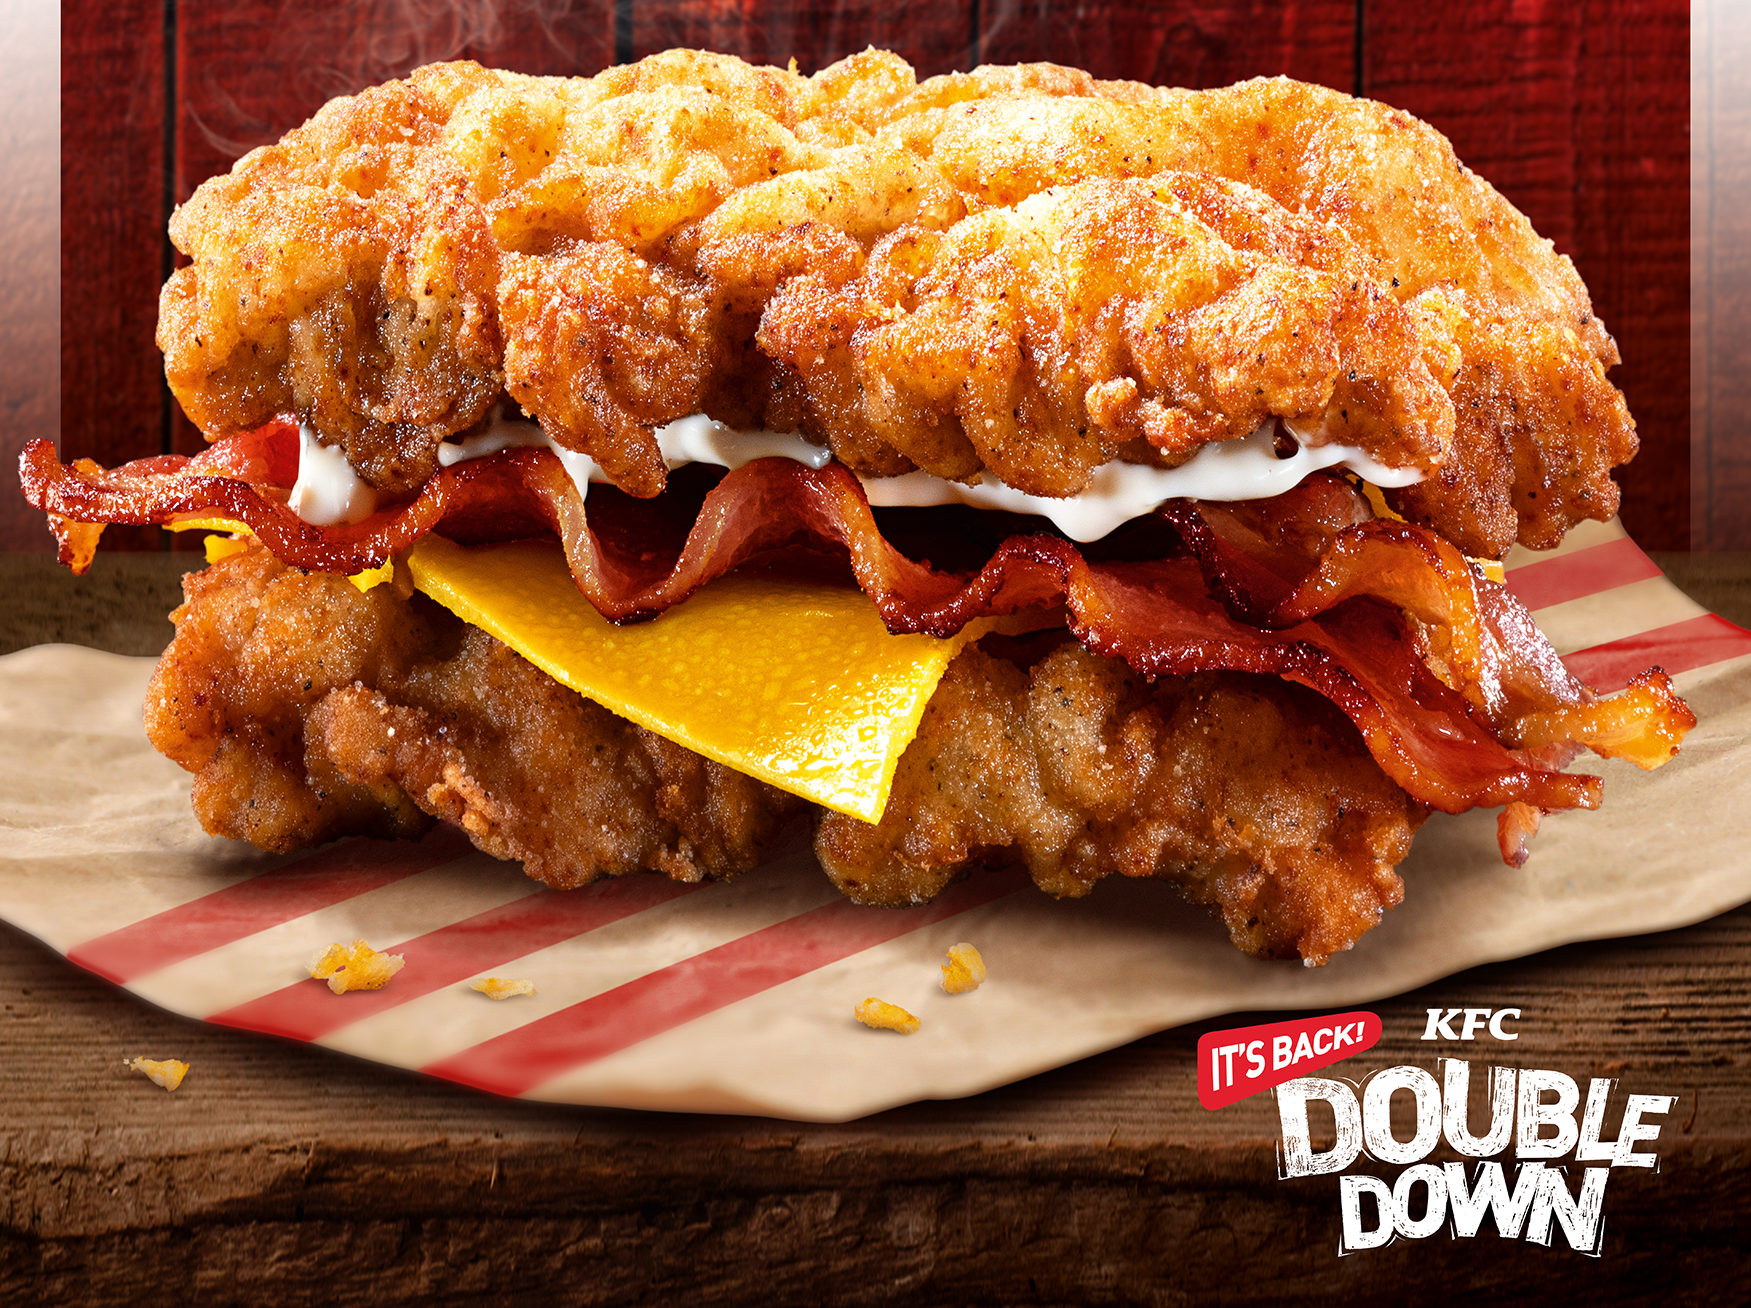 Food Bites: How KFC’s Double Down Started The Trend of Viral ‘Stunt Food’